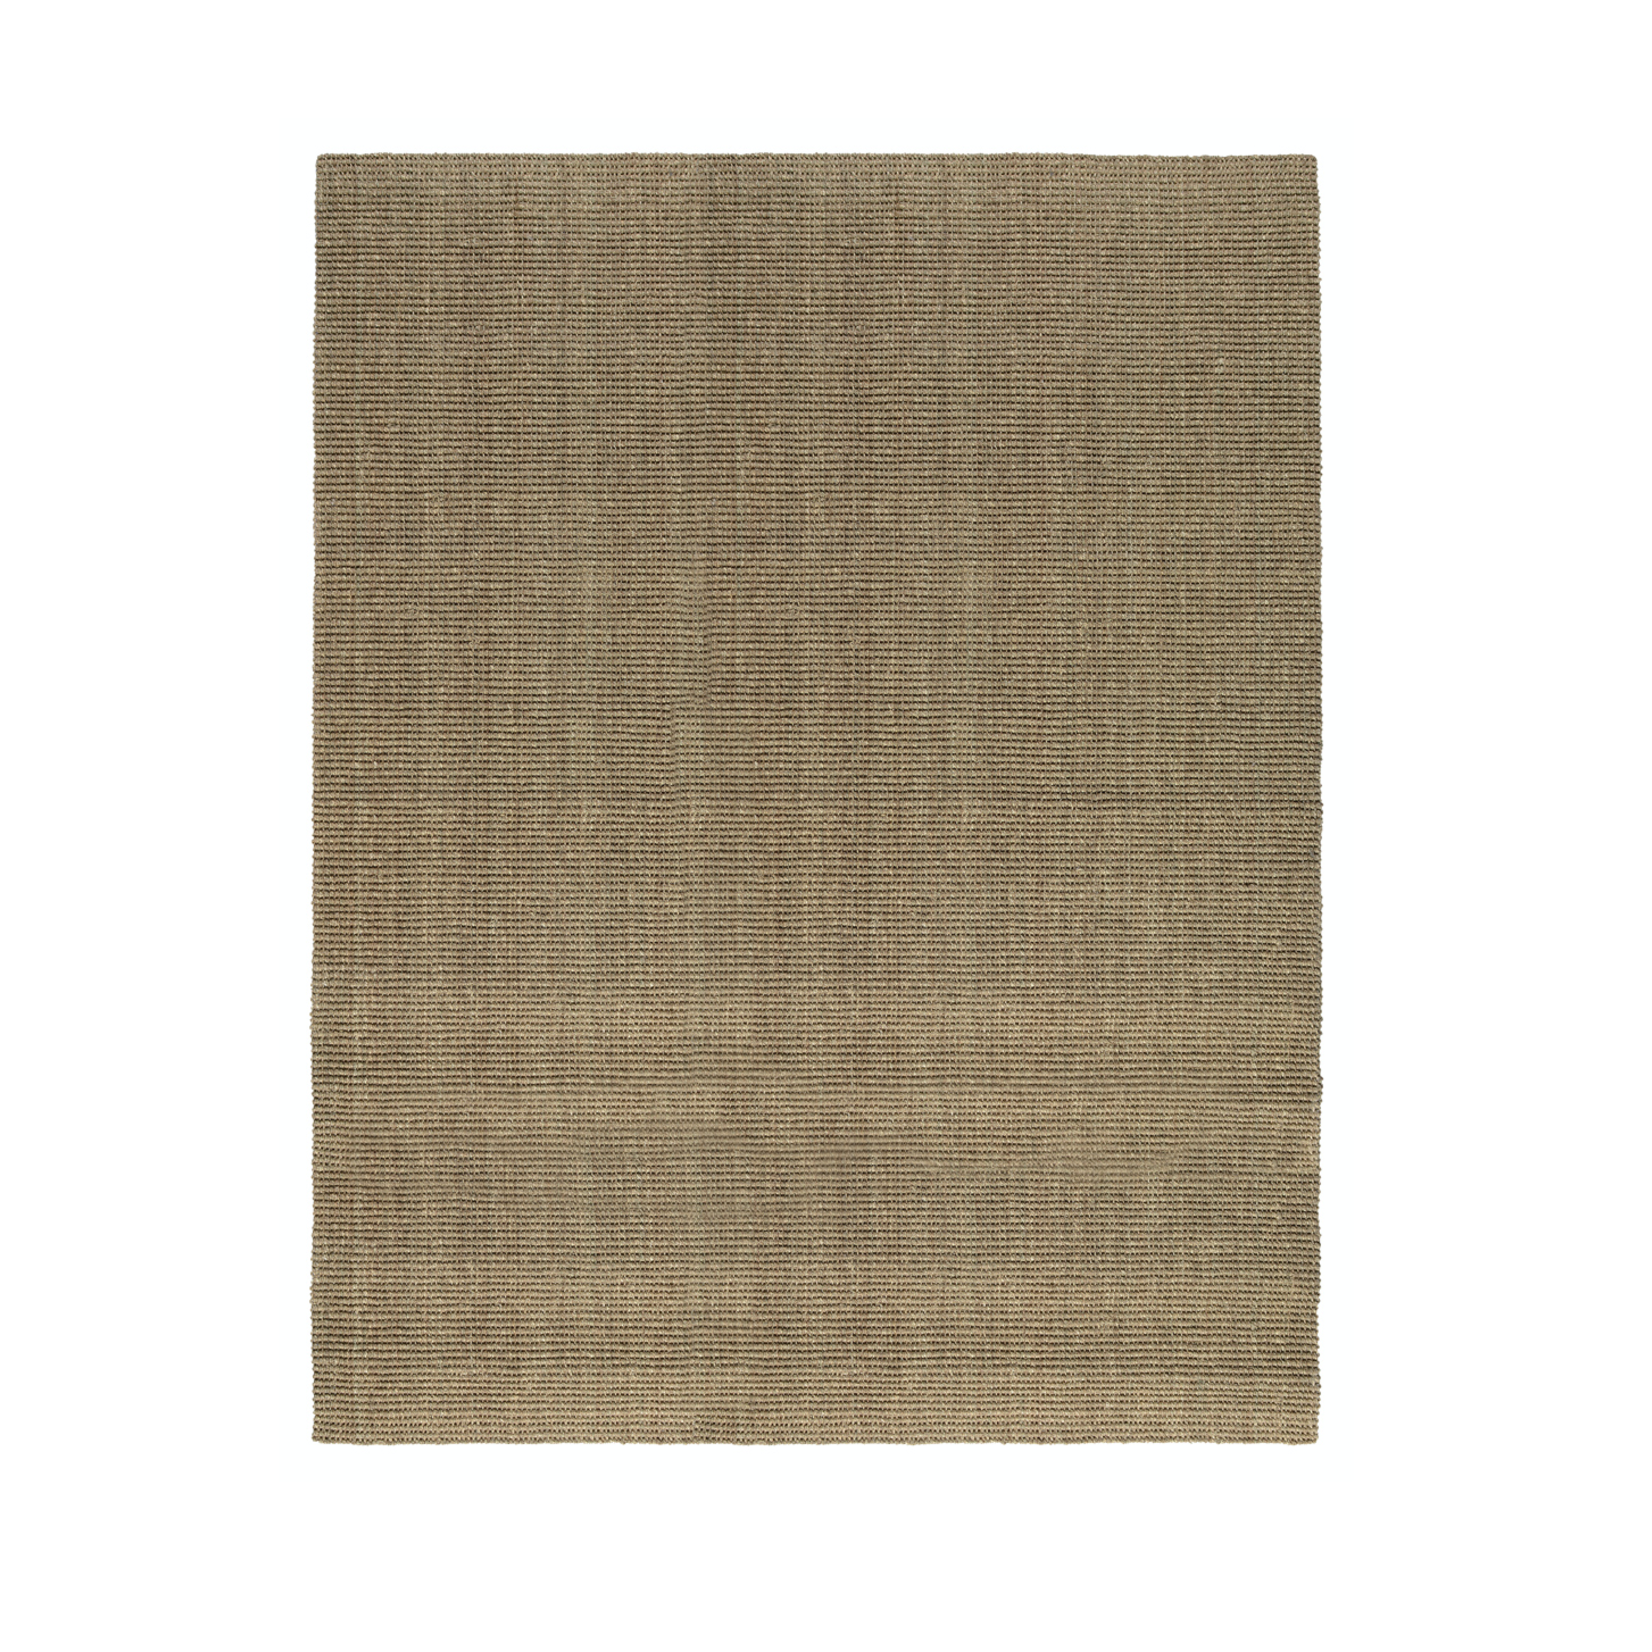 8x10 Handwoven Natural Seagrass Indoor Area Rug